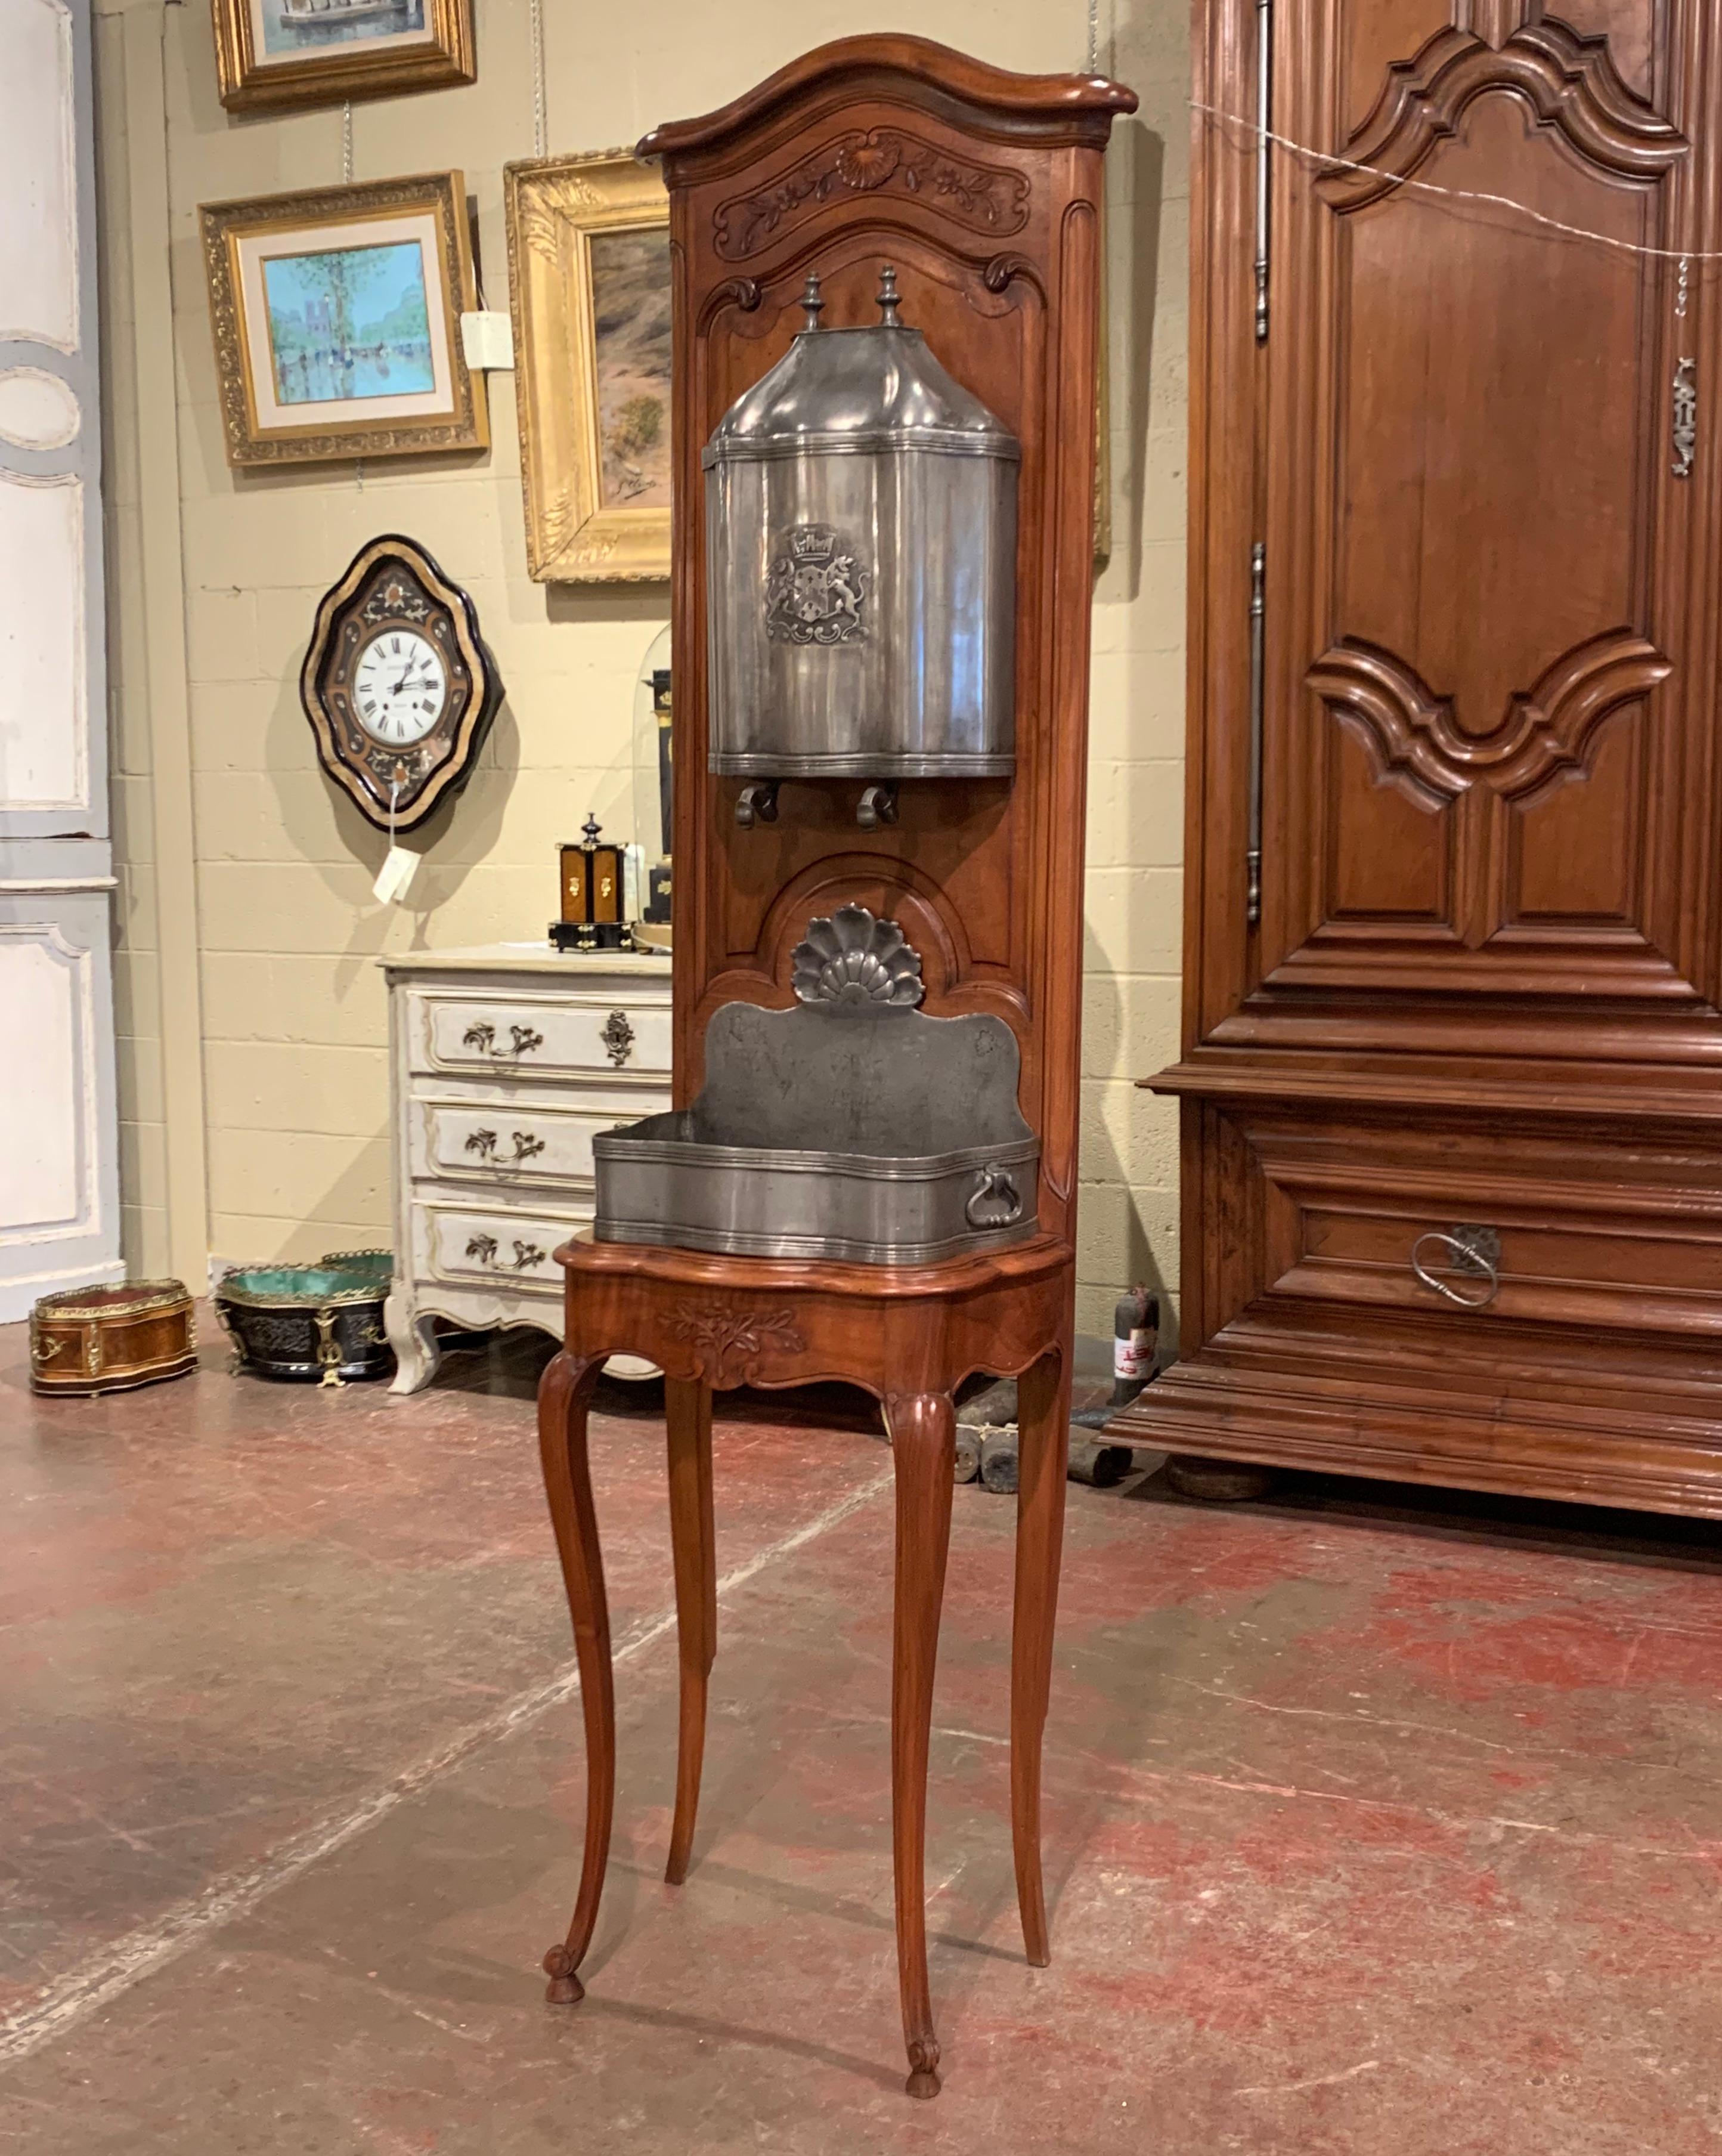 This elegant, antique fountain was crafted in Provence, France, circa 1950. The cabinet stands on cabriole legs over a scalloped apron, and the arched bonnet top features a carved shell motif with foliage. Made of pewter, the two-piece water